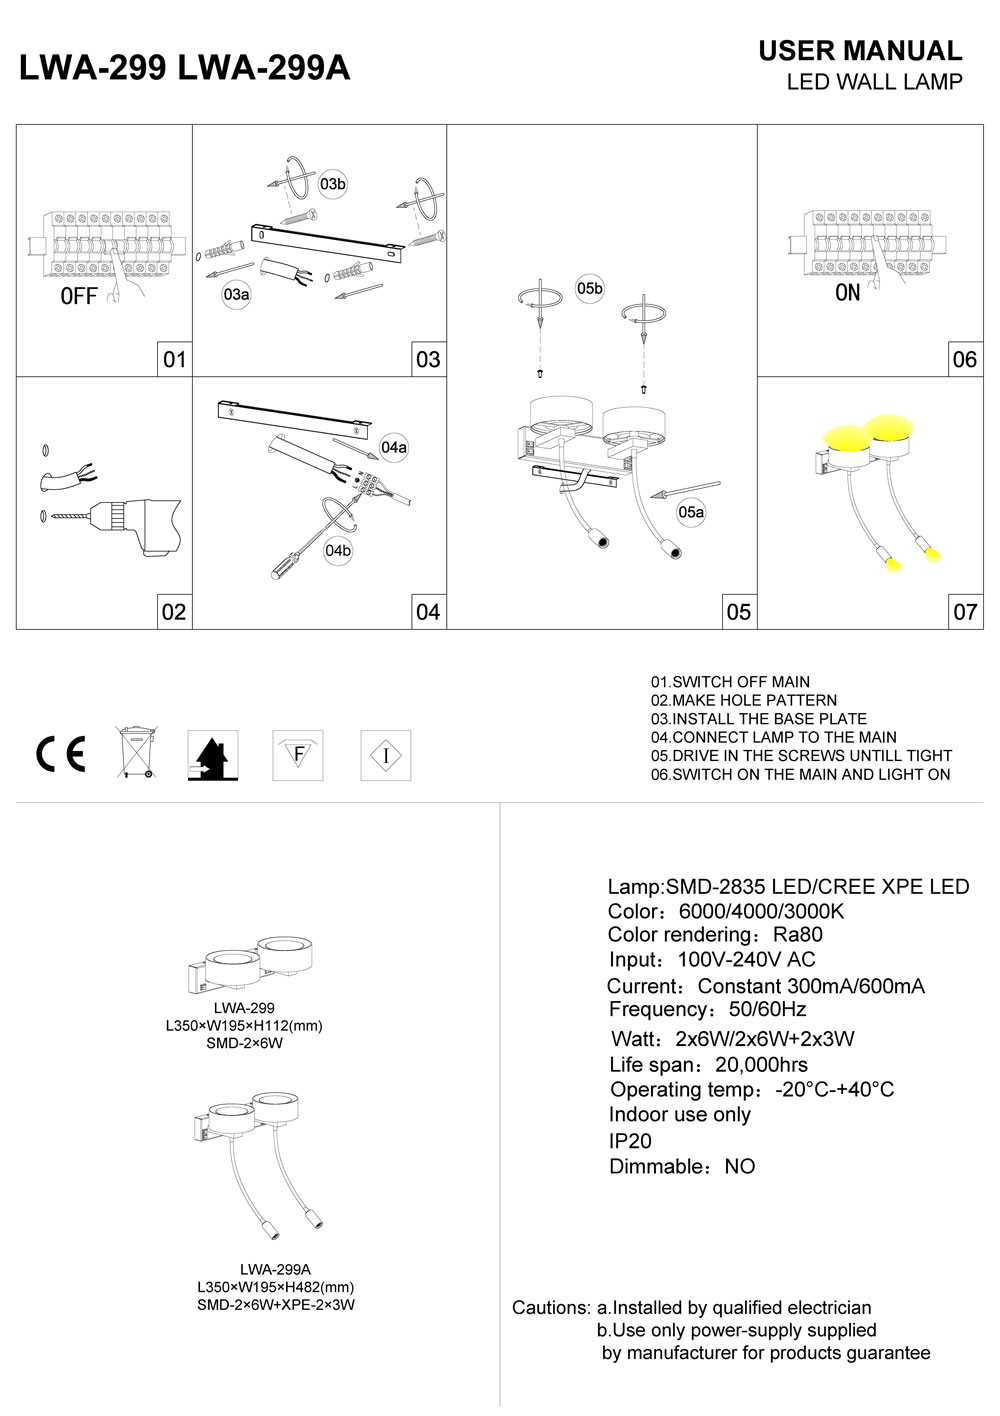 LWA-299-LWA-299A bedroom reading light installation guide